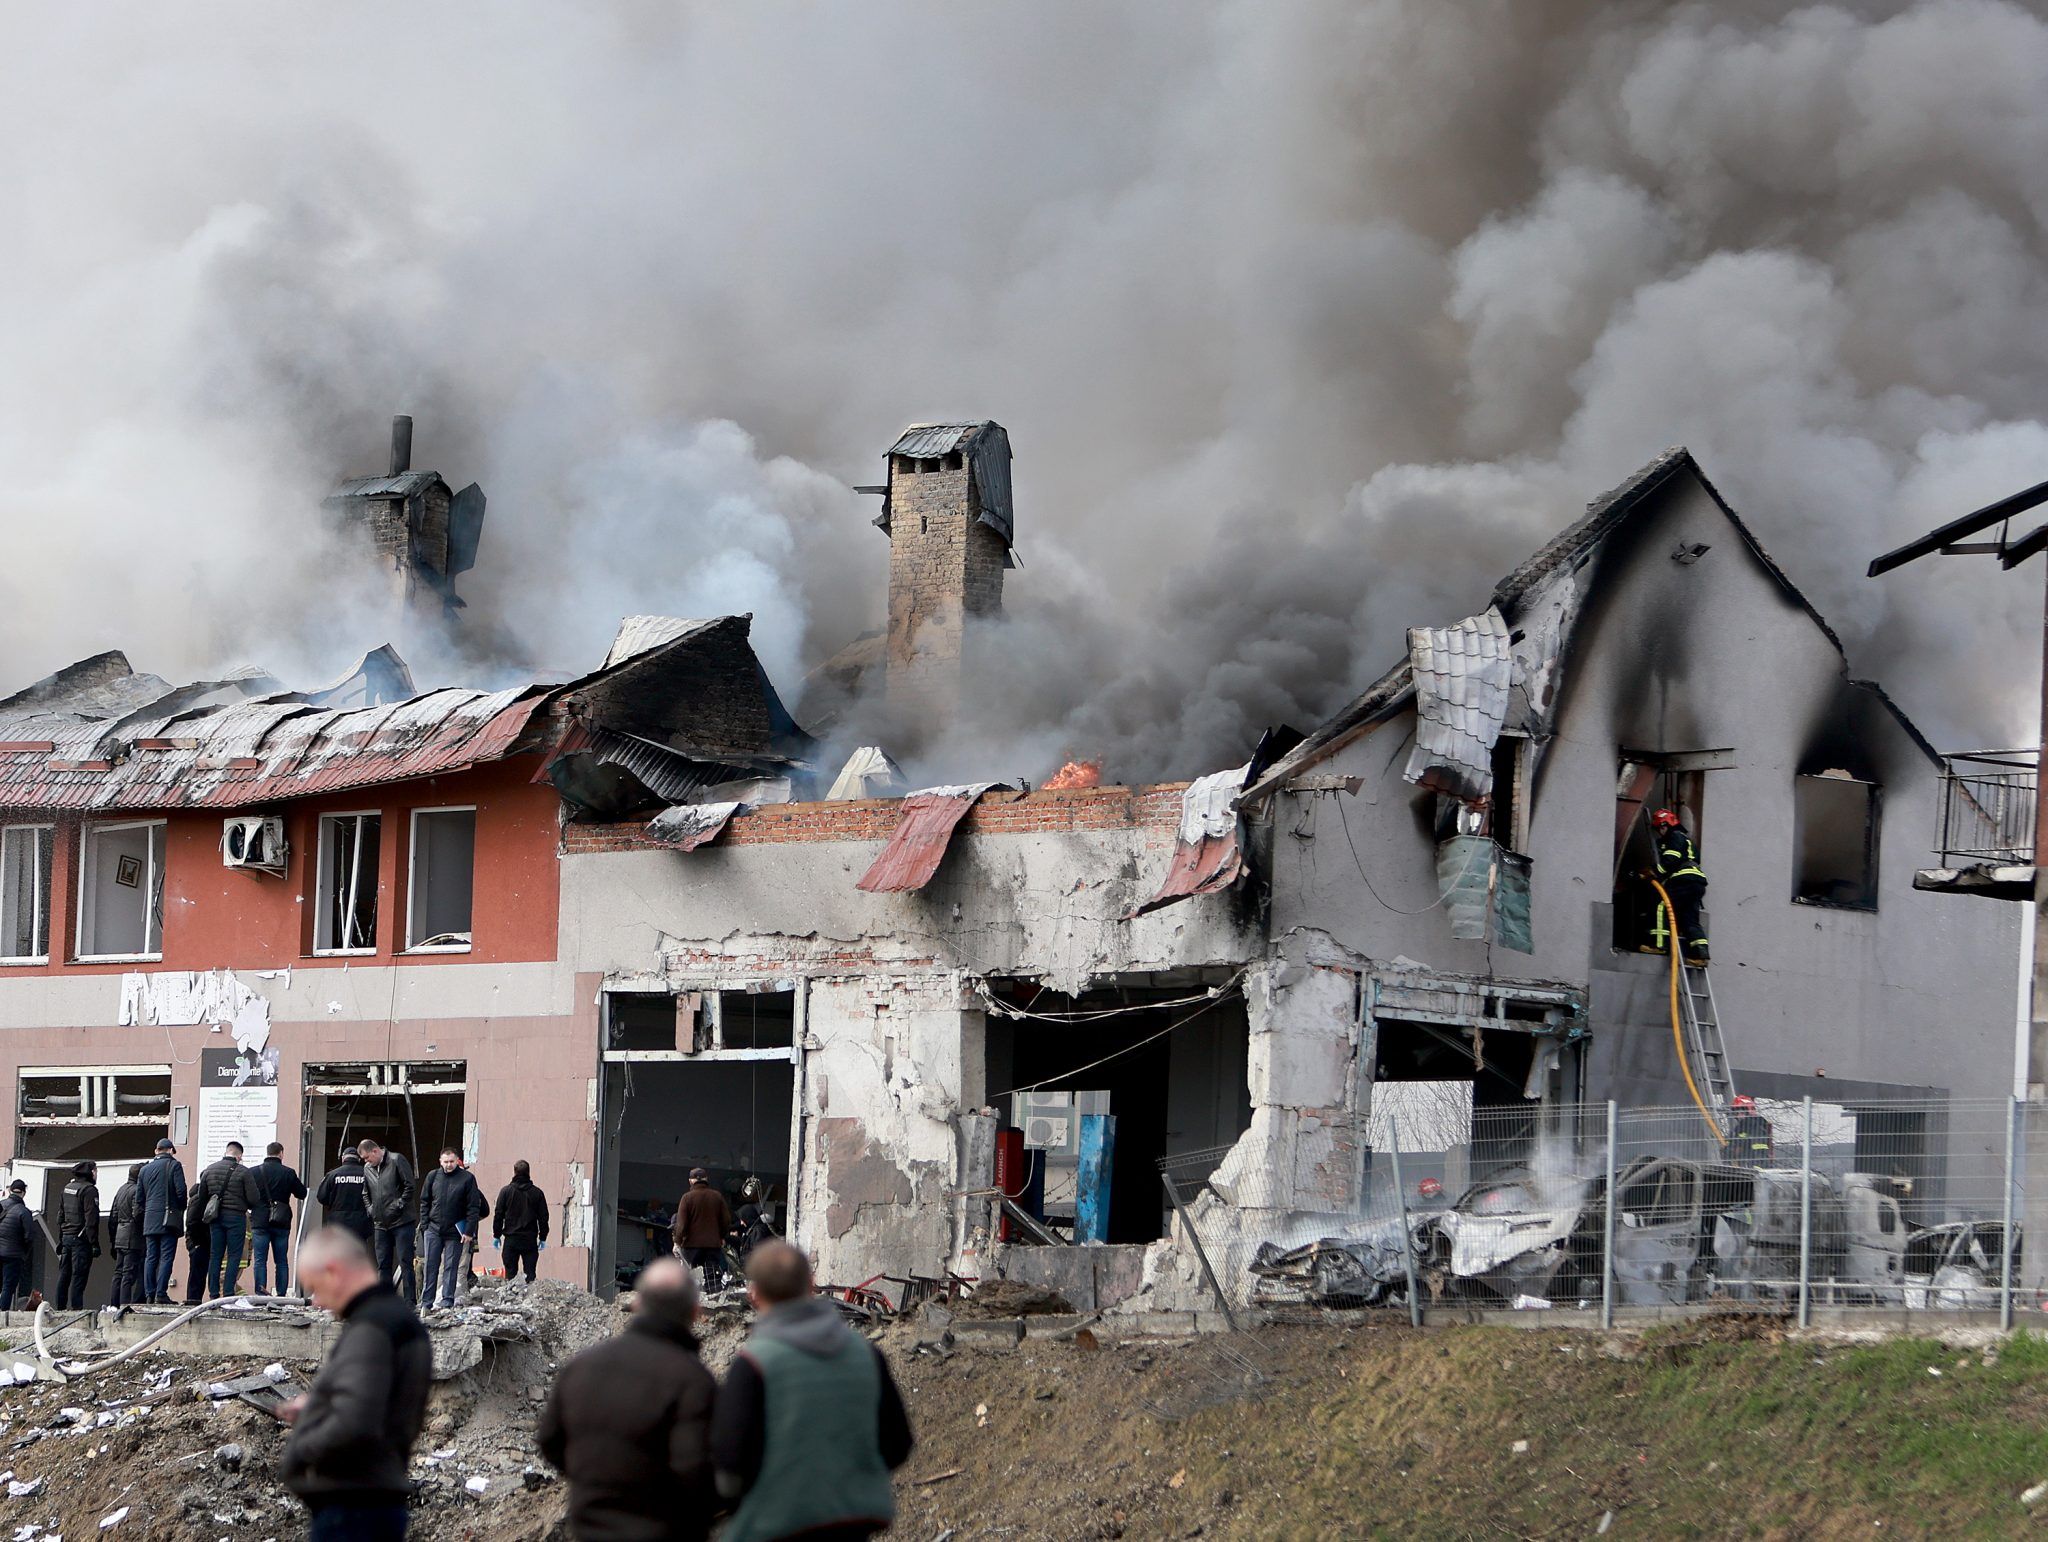 LVIV, UKRAINE - APRIL 18: Firefighters battle a blaze after a civilian building was hit by a Russian missile on April 18, 2022 in Lviv, Ukraine. At least six people were killed and eight wounded in missile strikes in different areas of the city, according to the governor. (Photo by Joe Raedle/Getty Images)